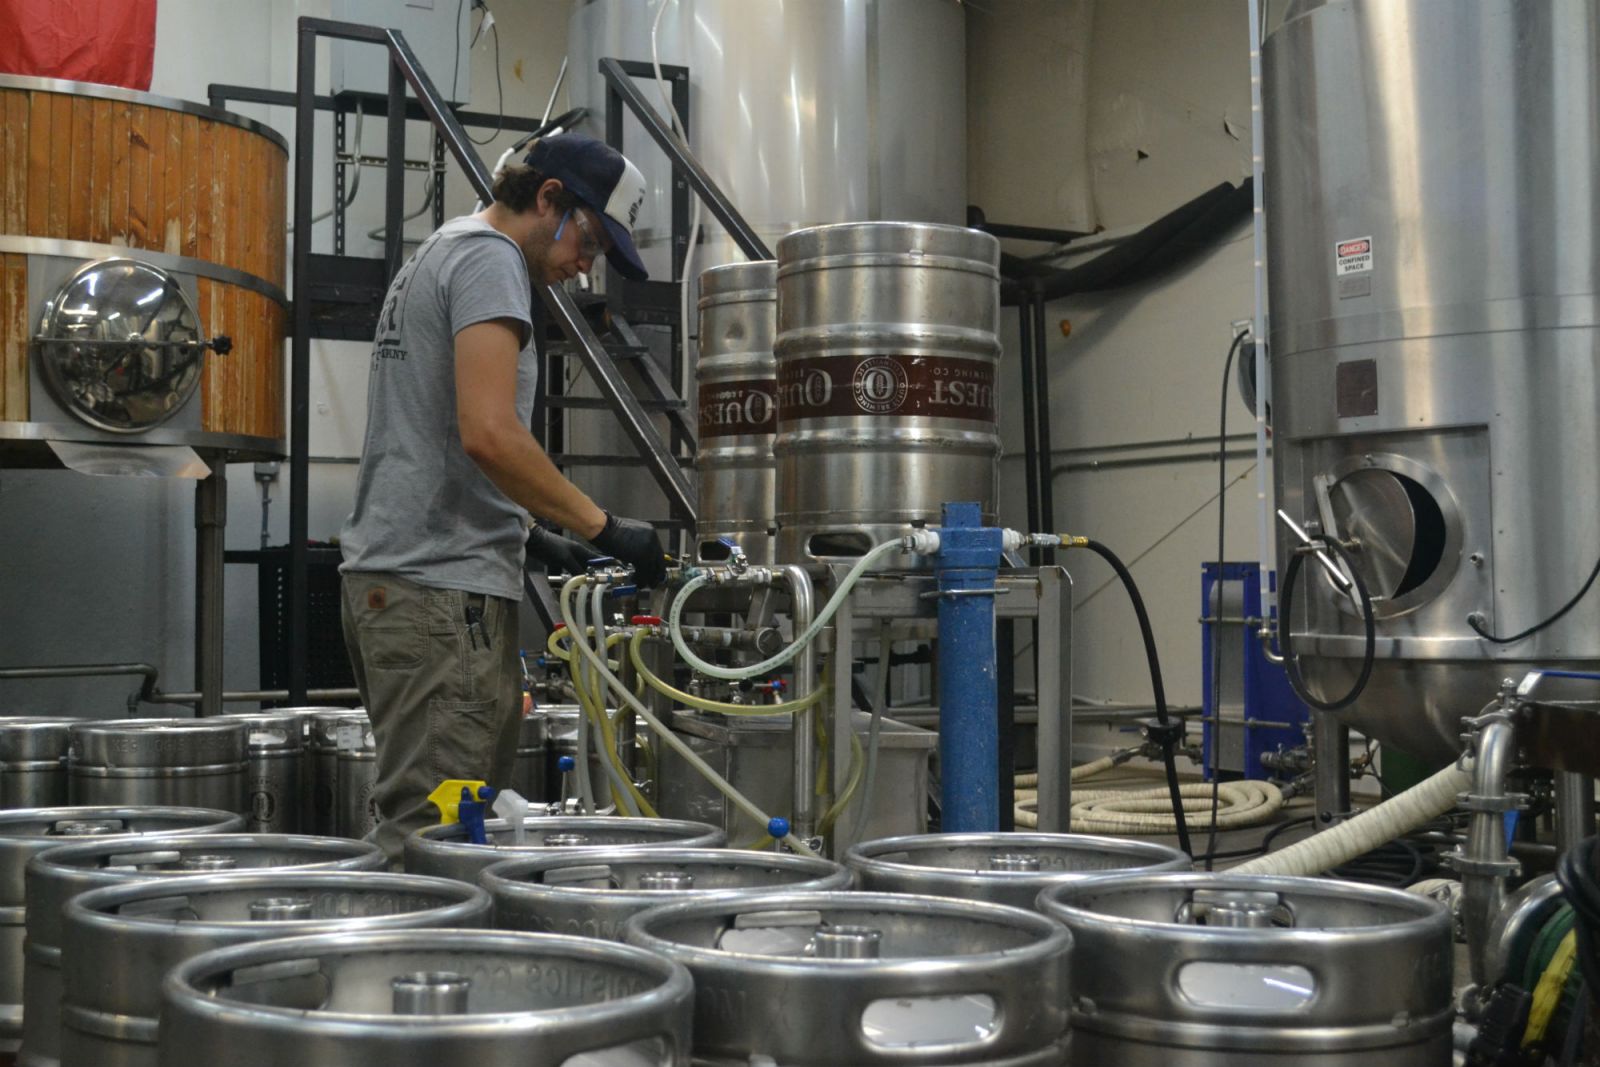 The Brewers Association puts the total economic impact of the craft beer industry in South Carolina at $650 million in 2017, which is 28th among states in terms of dollars, but 49th in impact per capita. Quest Brewing in Greenville is one of those craft brewers. (Photo/Ross Norton)